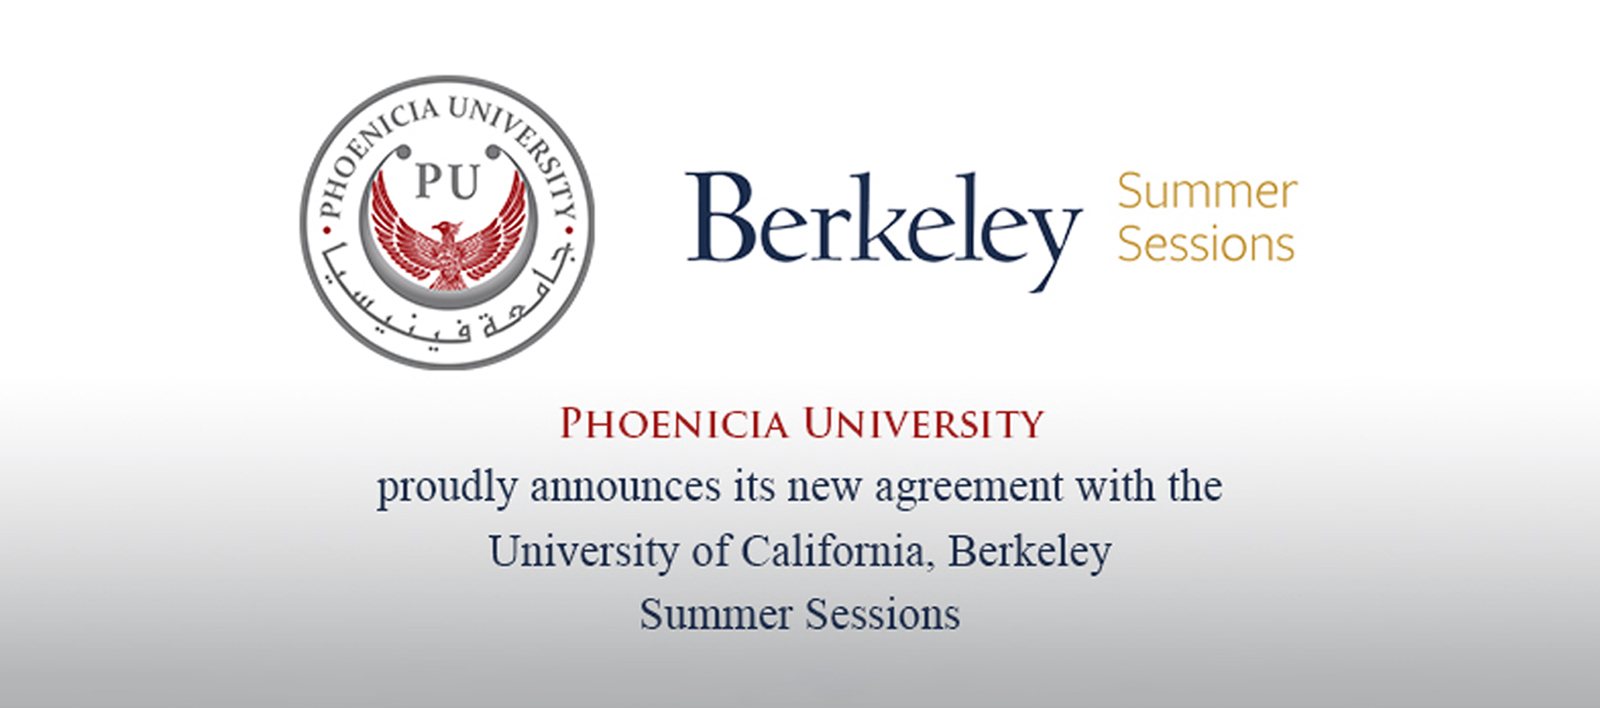 Agreement with the University of California, Berkeley (UC Berkeley) Summer Sessions